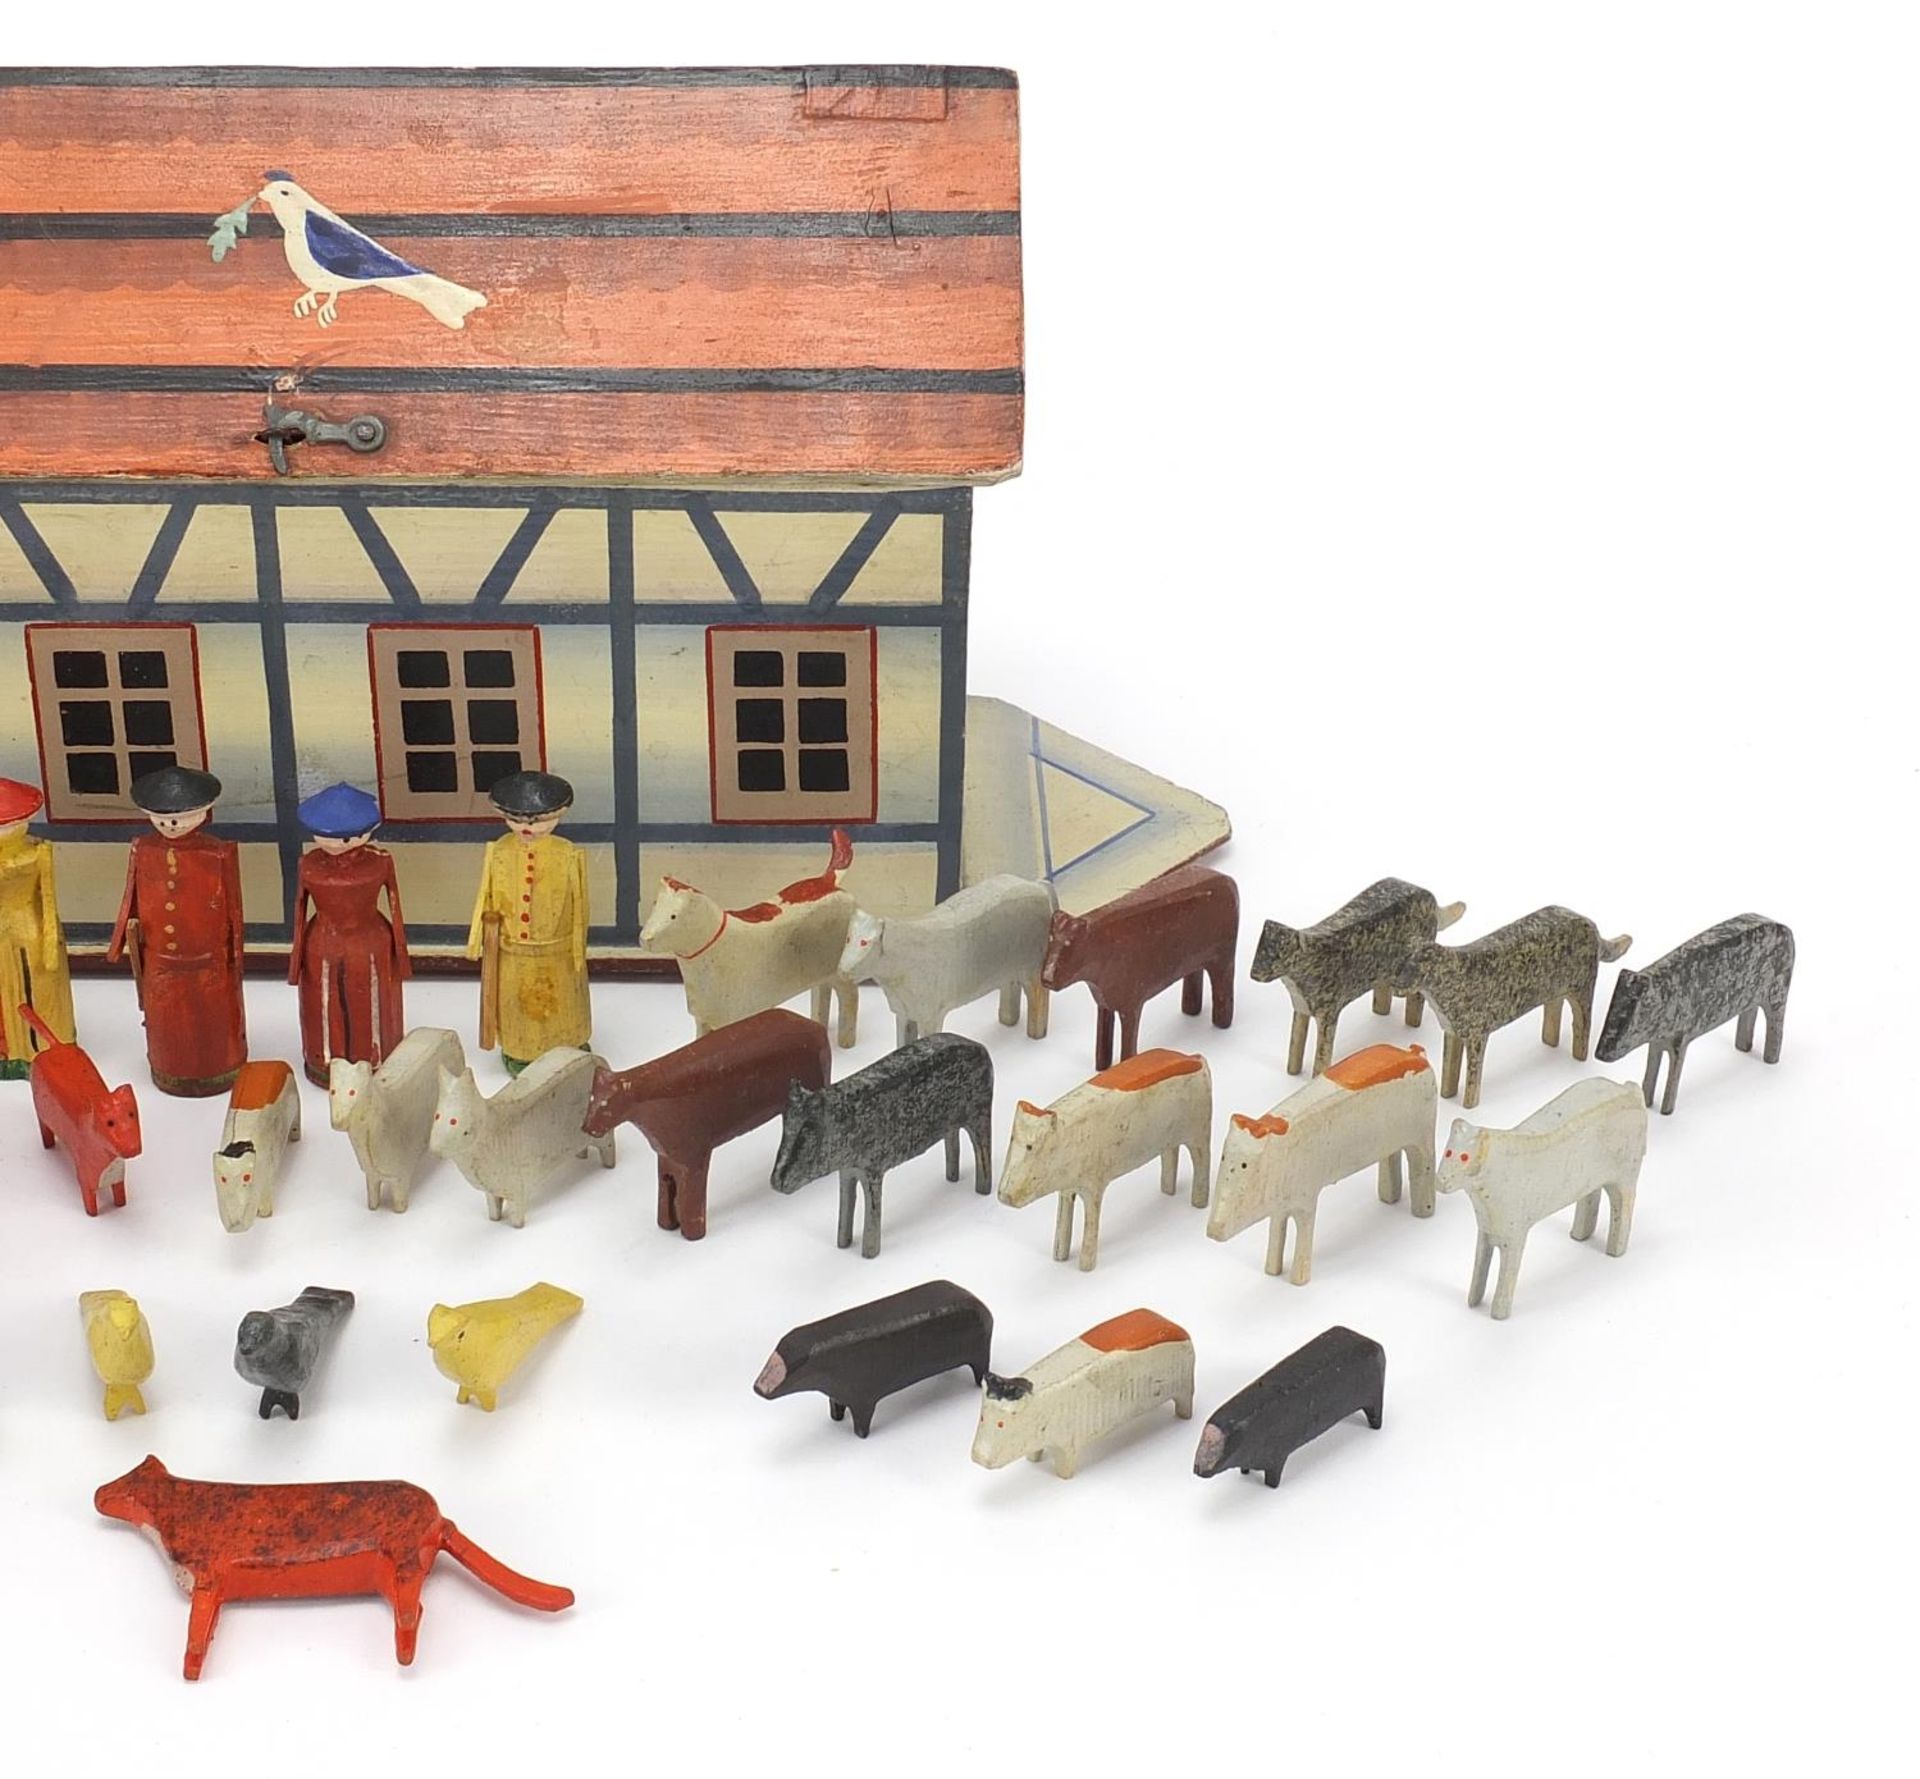 Old wooden Noah's ark with carved woodens animals including horses, 33cm in length - Image 3 of 5